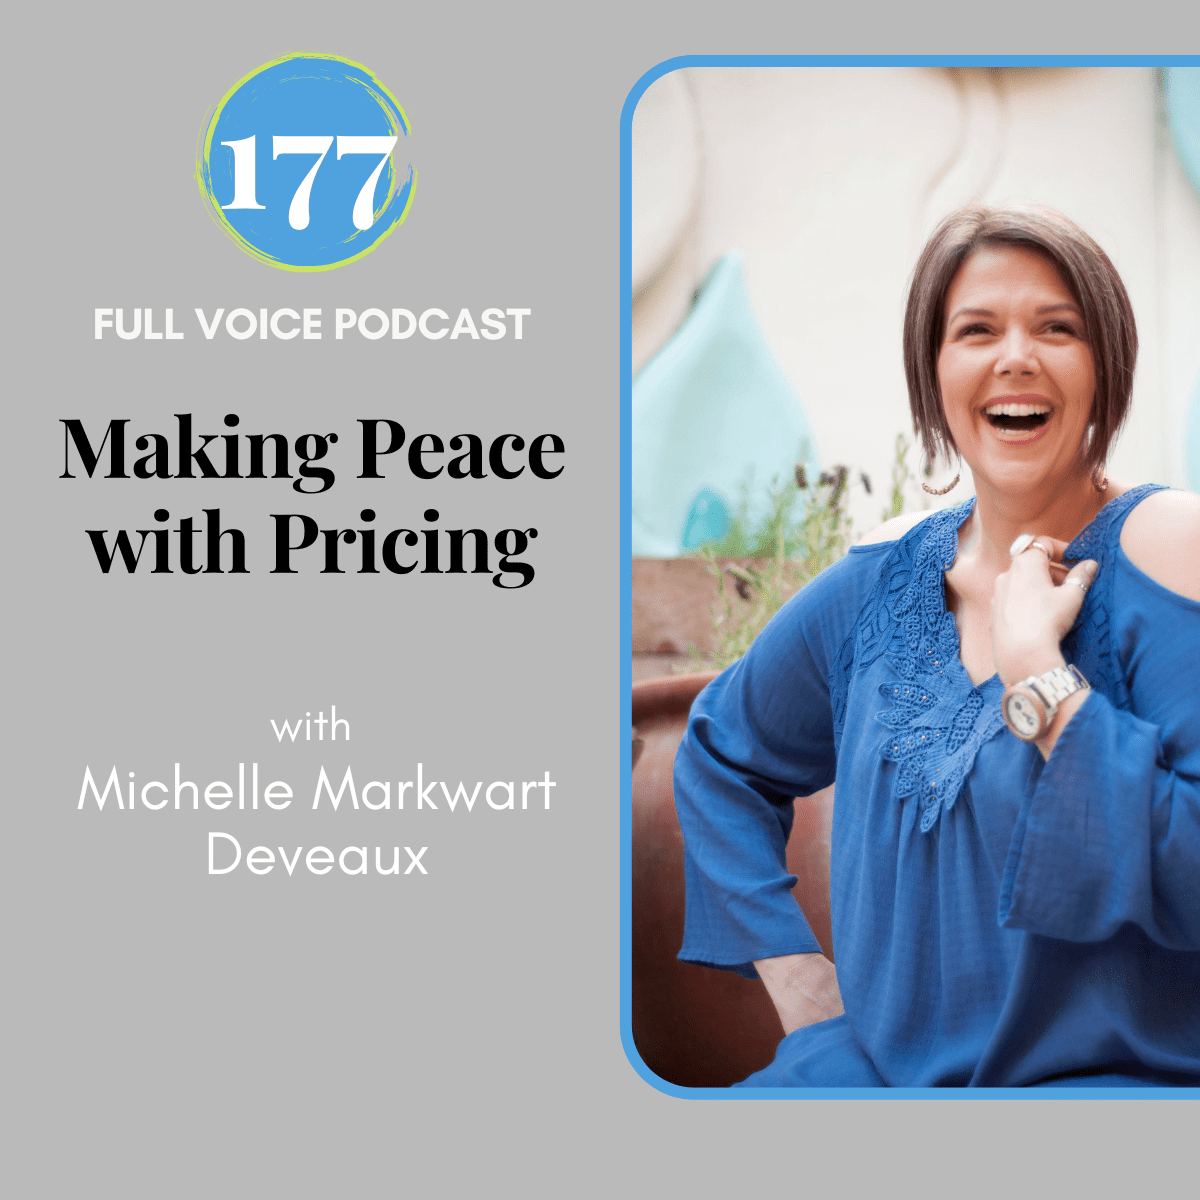 Episode 177 of the FULL VOICE Podcast: Making Peace with Pricing with Michelle Markwart Deveaux